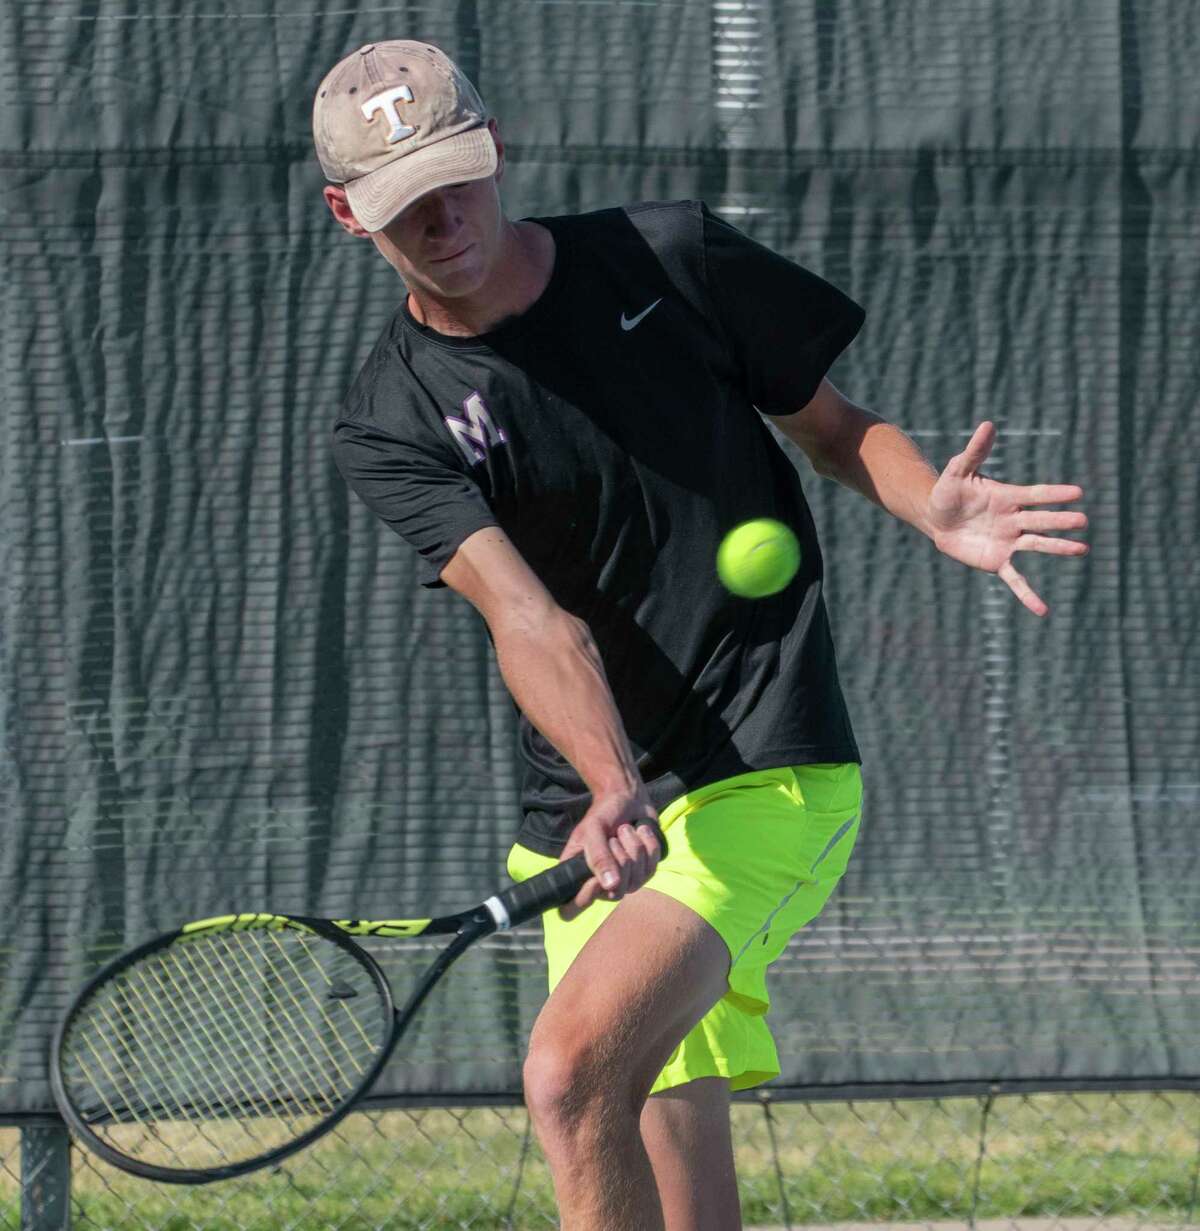 Midland High's Caden Carriger returns a shot during doubles play against Legacy High 09/27/2022 at the Midland High tennis courts. Tim Fischer/Reporter-Telegram